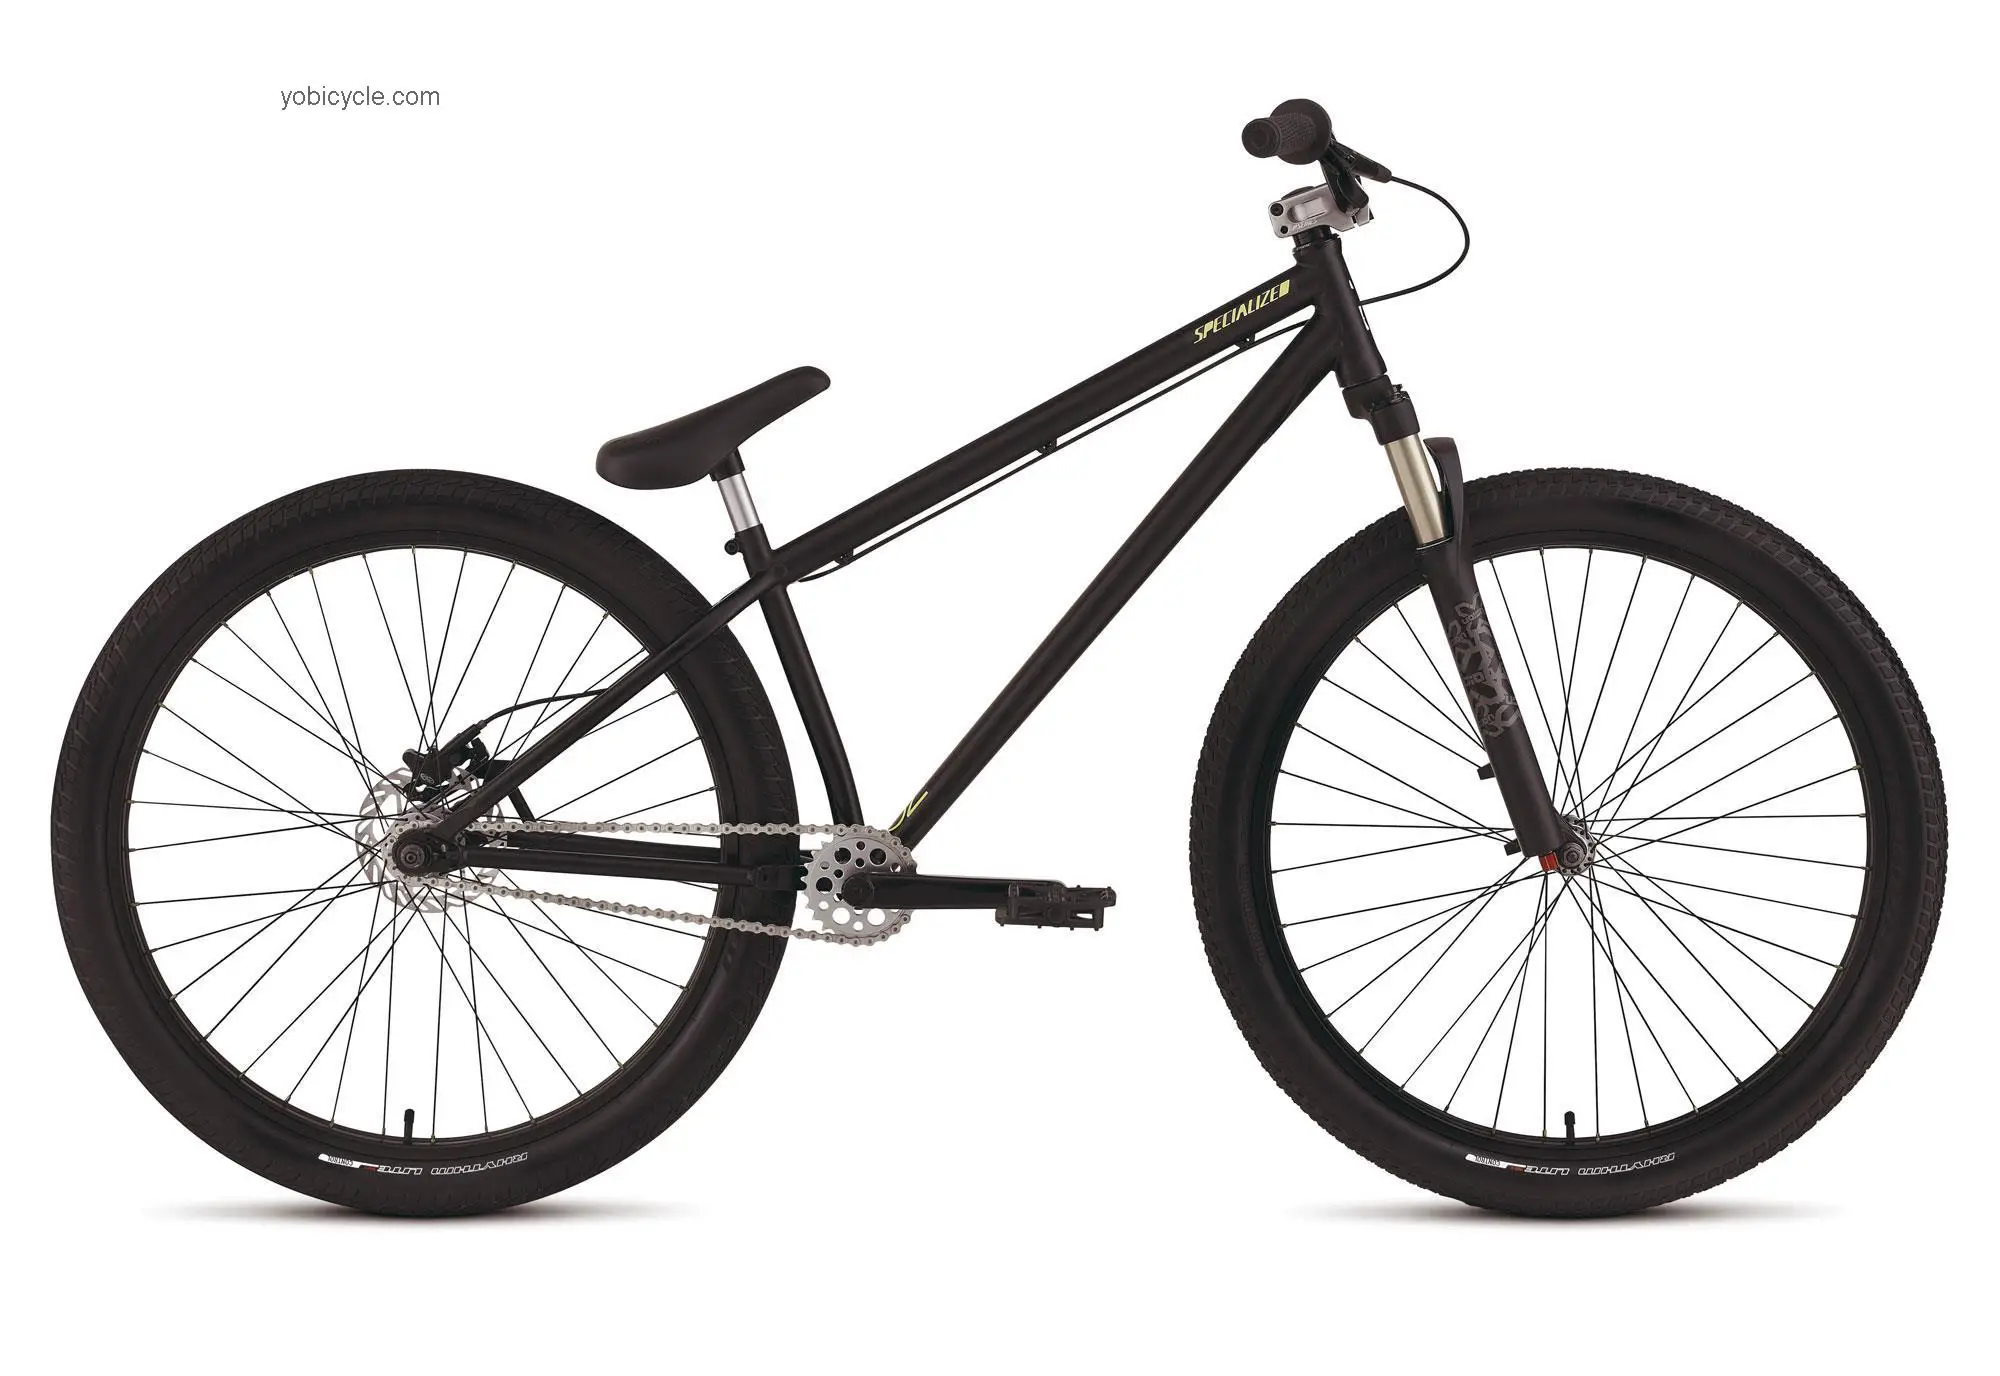 Specialized P2 2012 comparison online with competitors